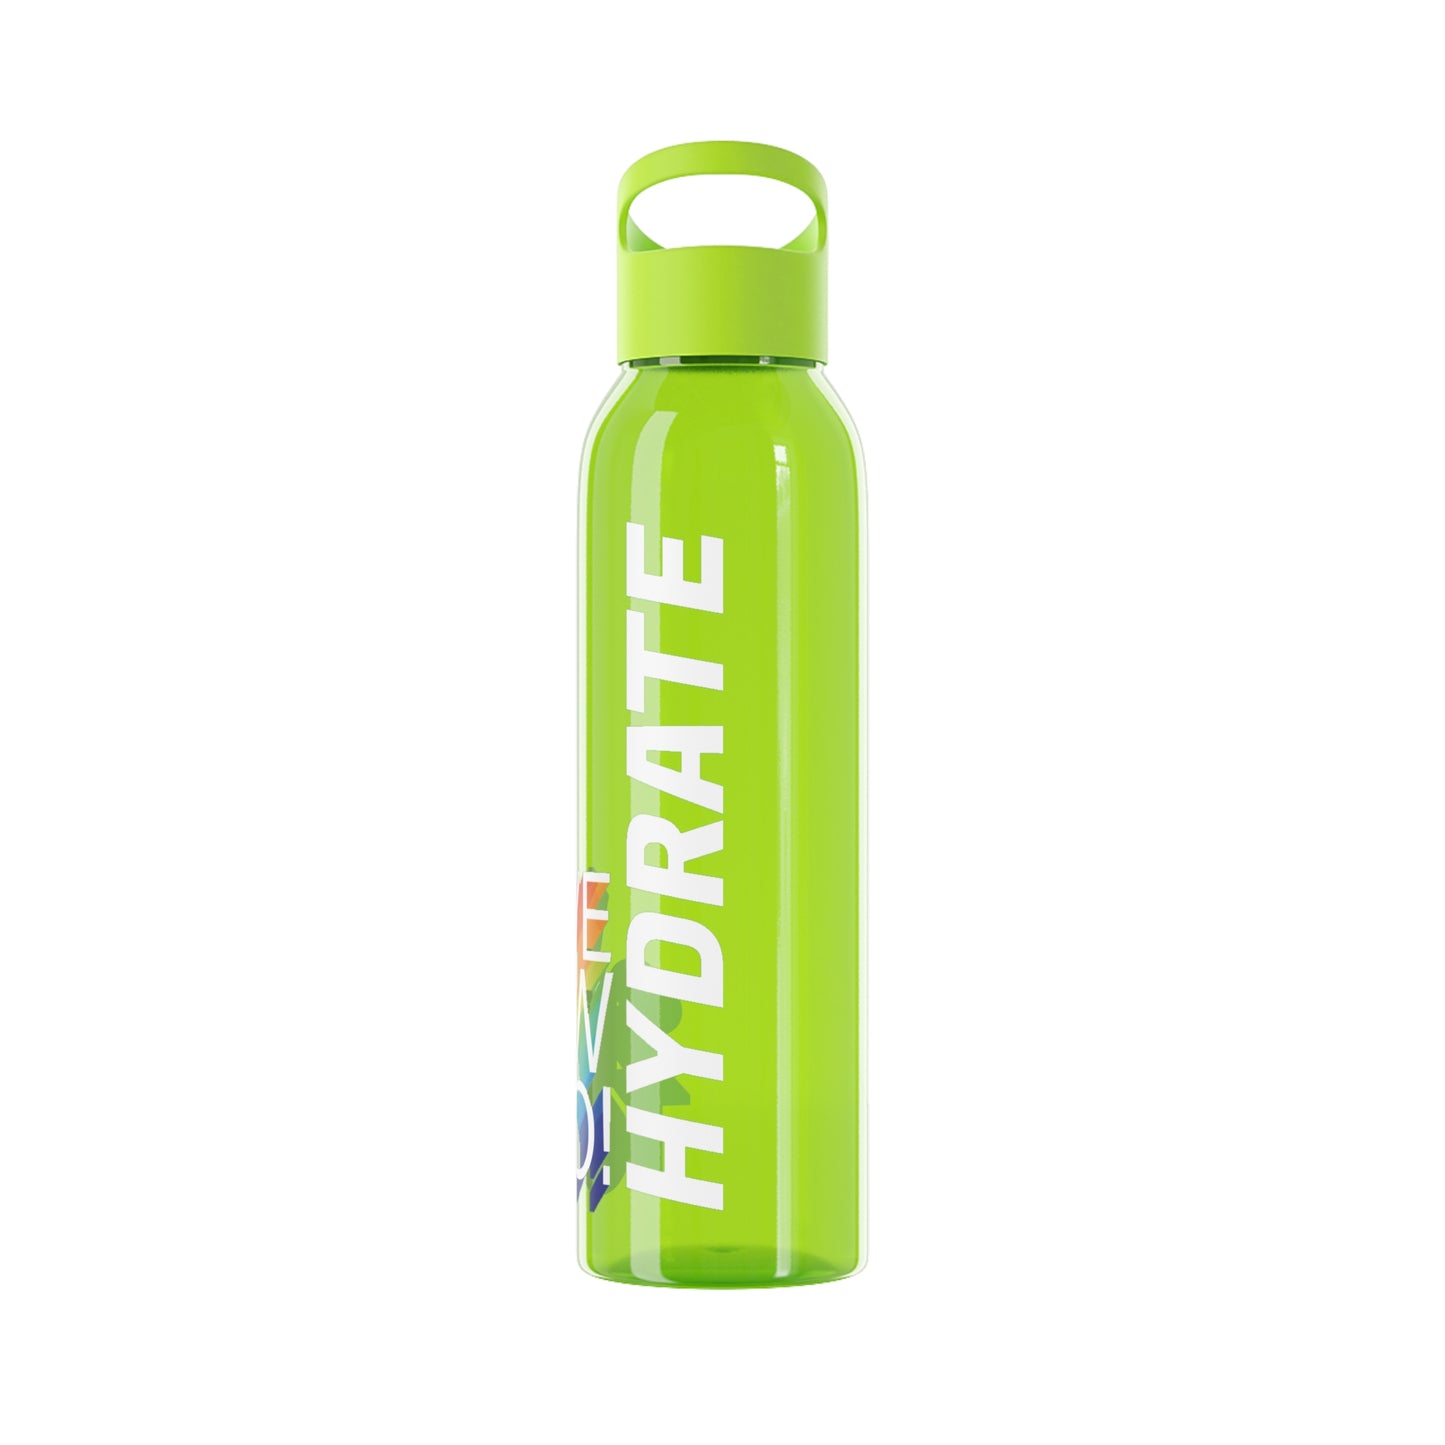 We Sew Too Hydrate water bottle